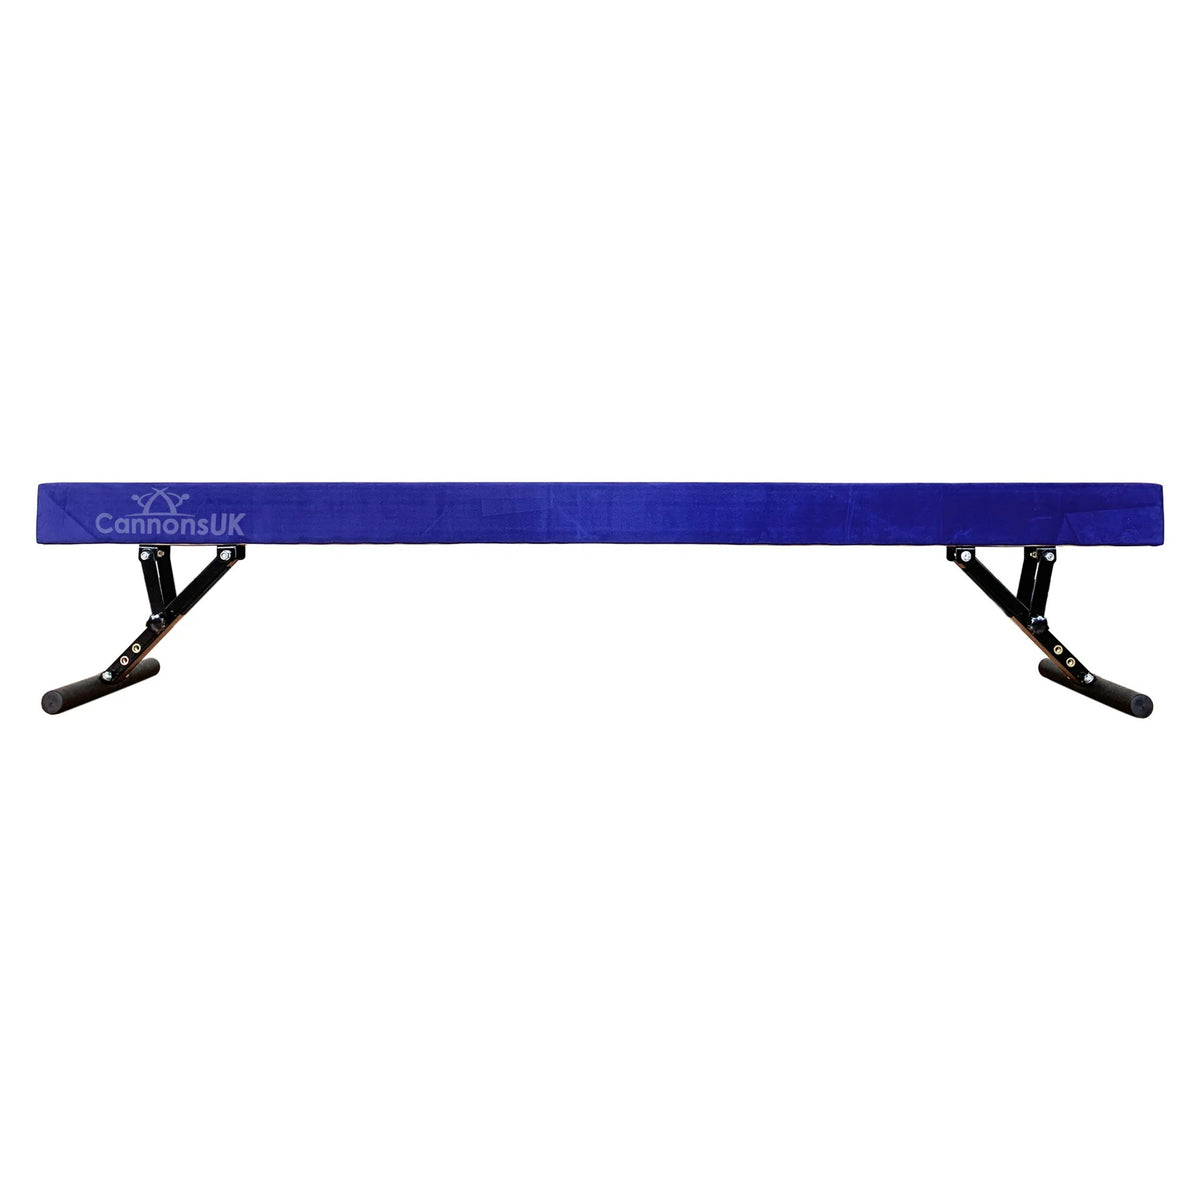 Solid 8ft Gymnastics Beam with folding adjustable legs Cannons UK - Cannons UK